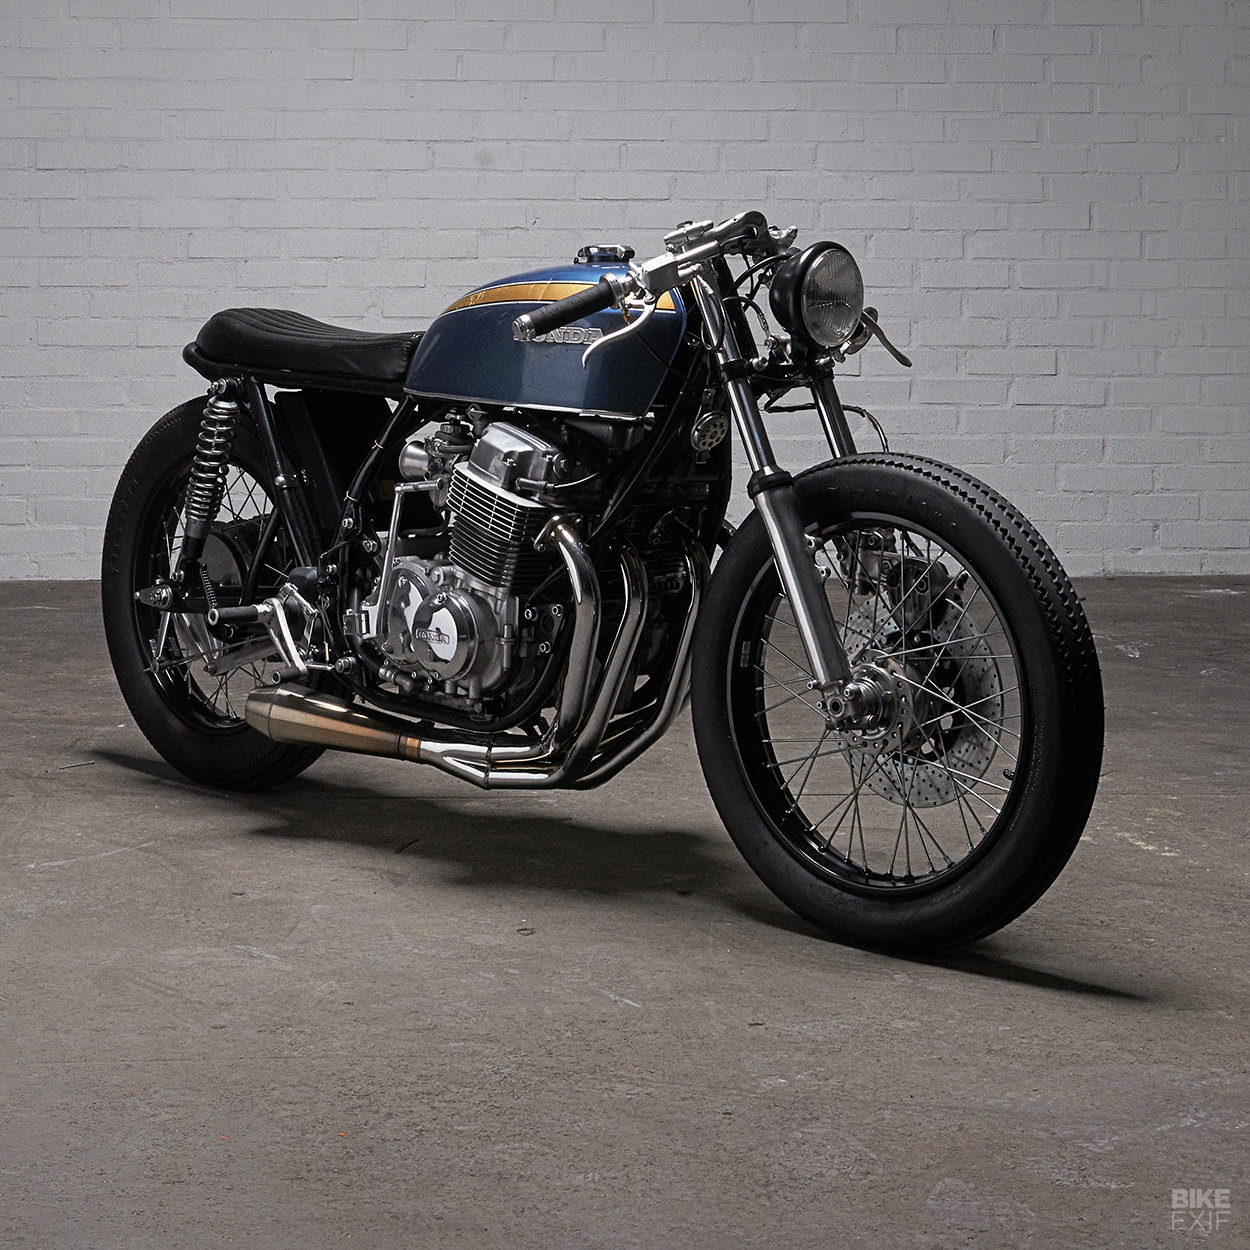 Swedish twins: A pair of vintage café racers from PAAL | Bike EXIF